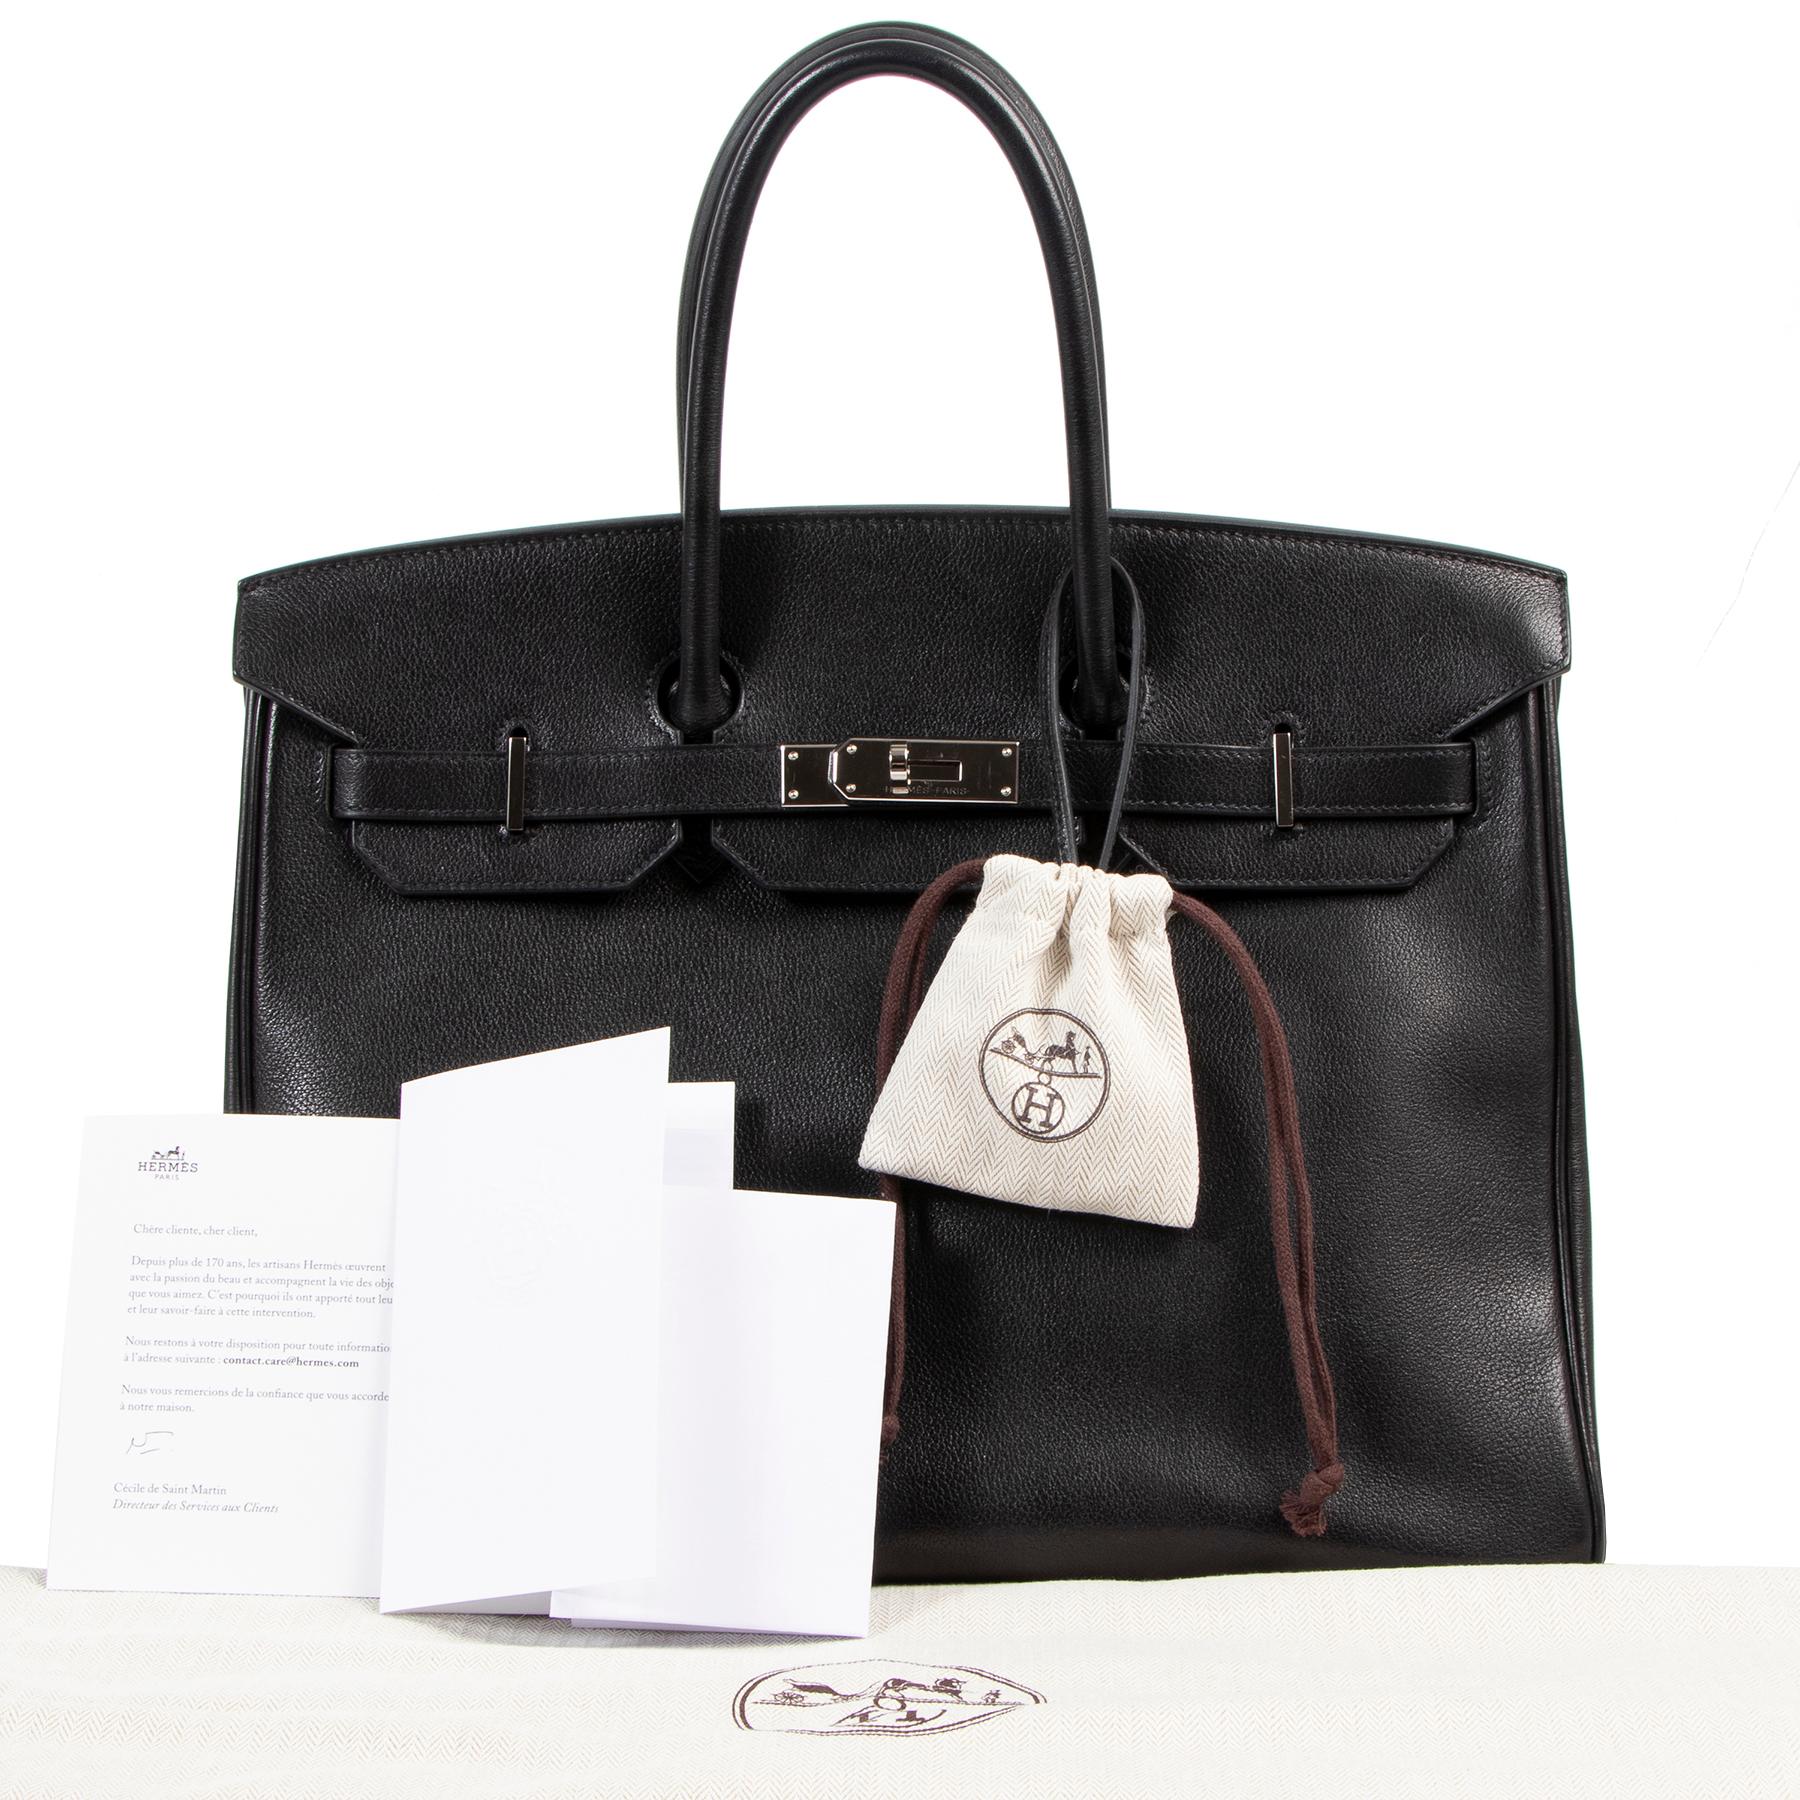 Excellent condition

Hermès Birkin 35 Black Veau Evergrain PHW

This stunning black Hermès Birknin bag is crafted out of amazingly beautiful Veau Evergrain leather.

The palladium toned hardware makes this even more stunning to carry around!

Comes